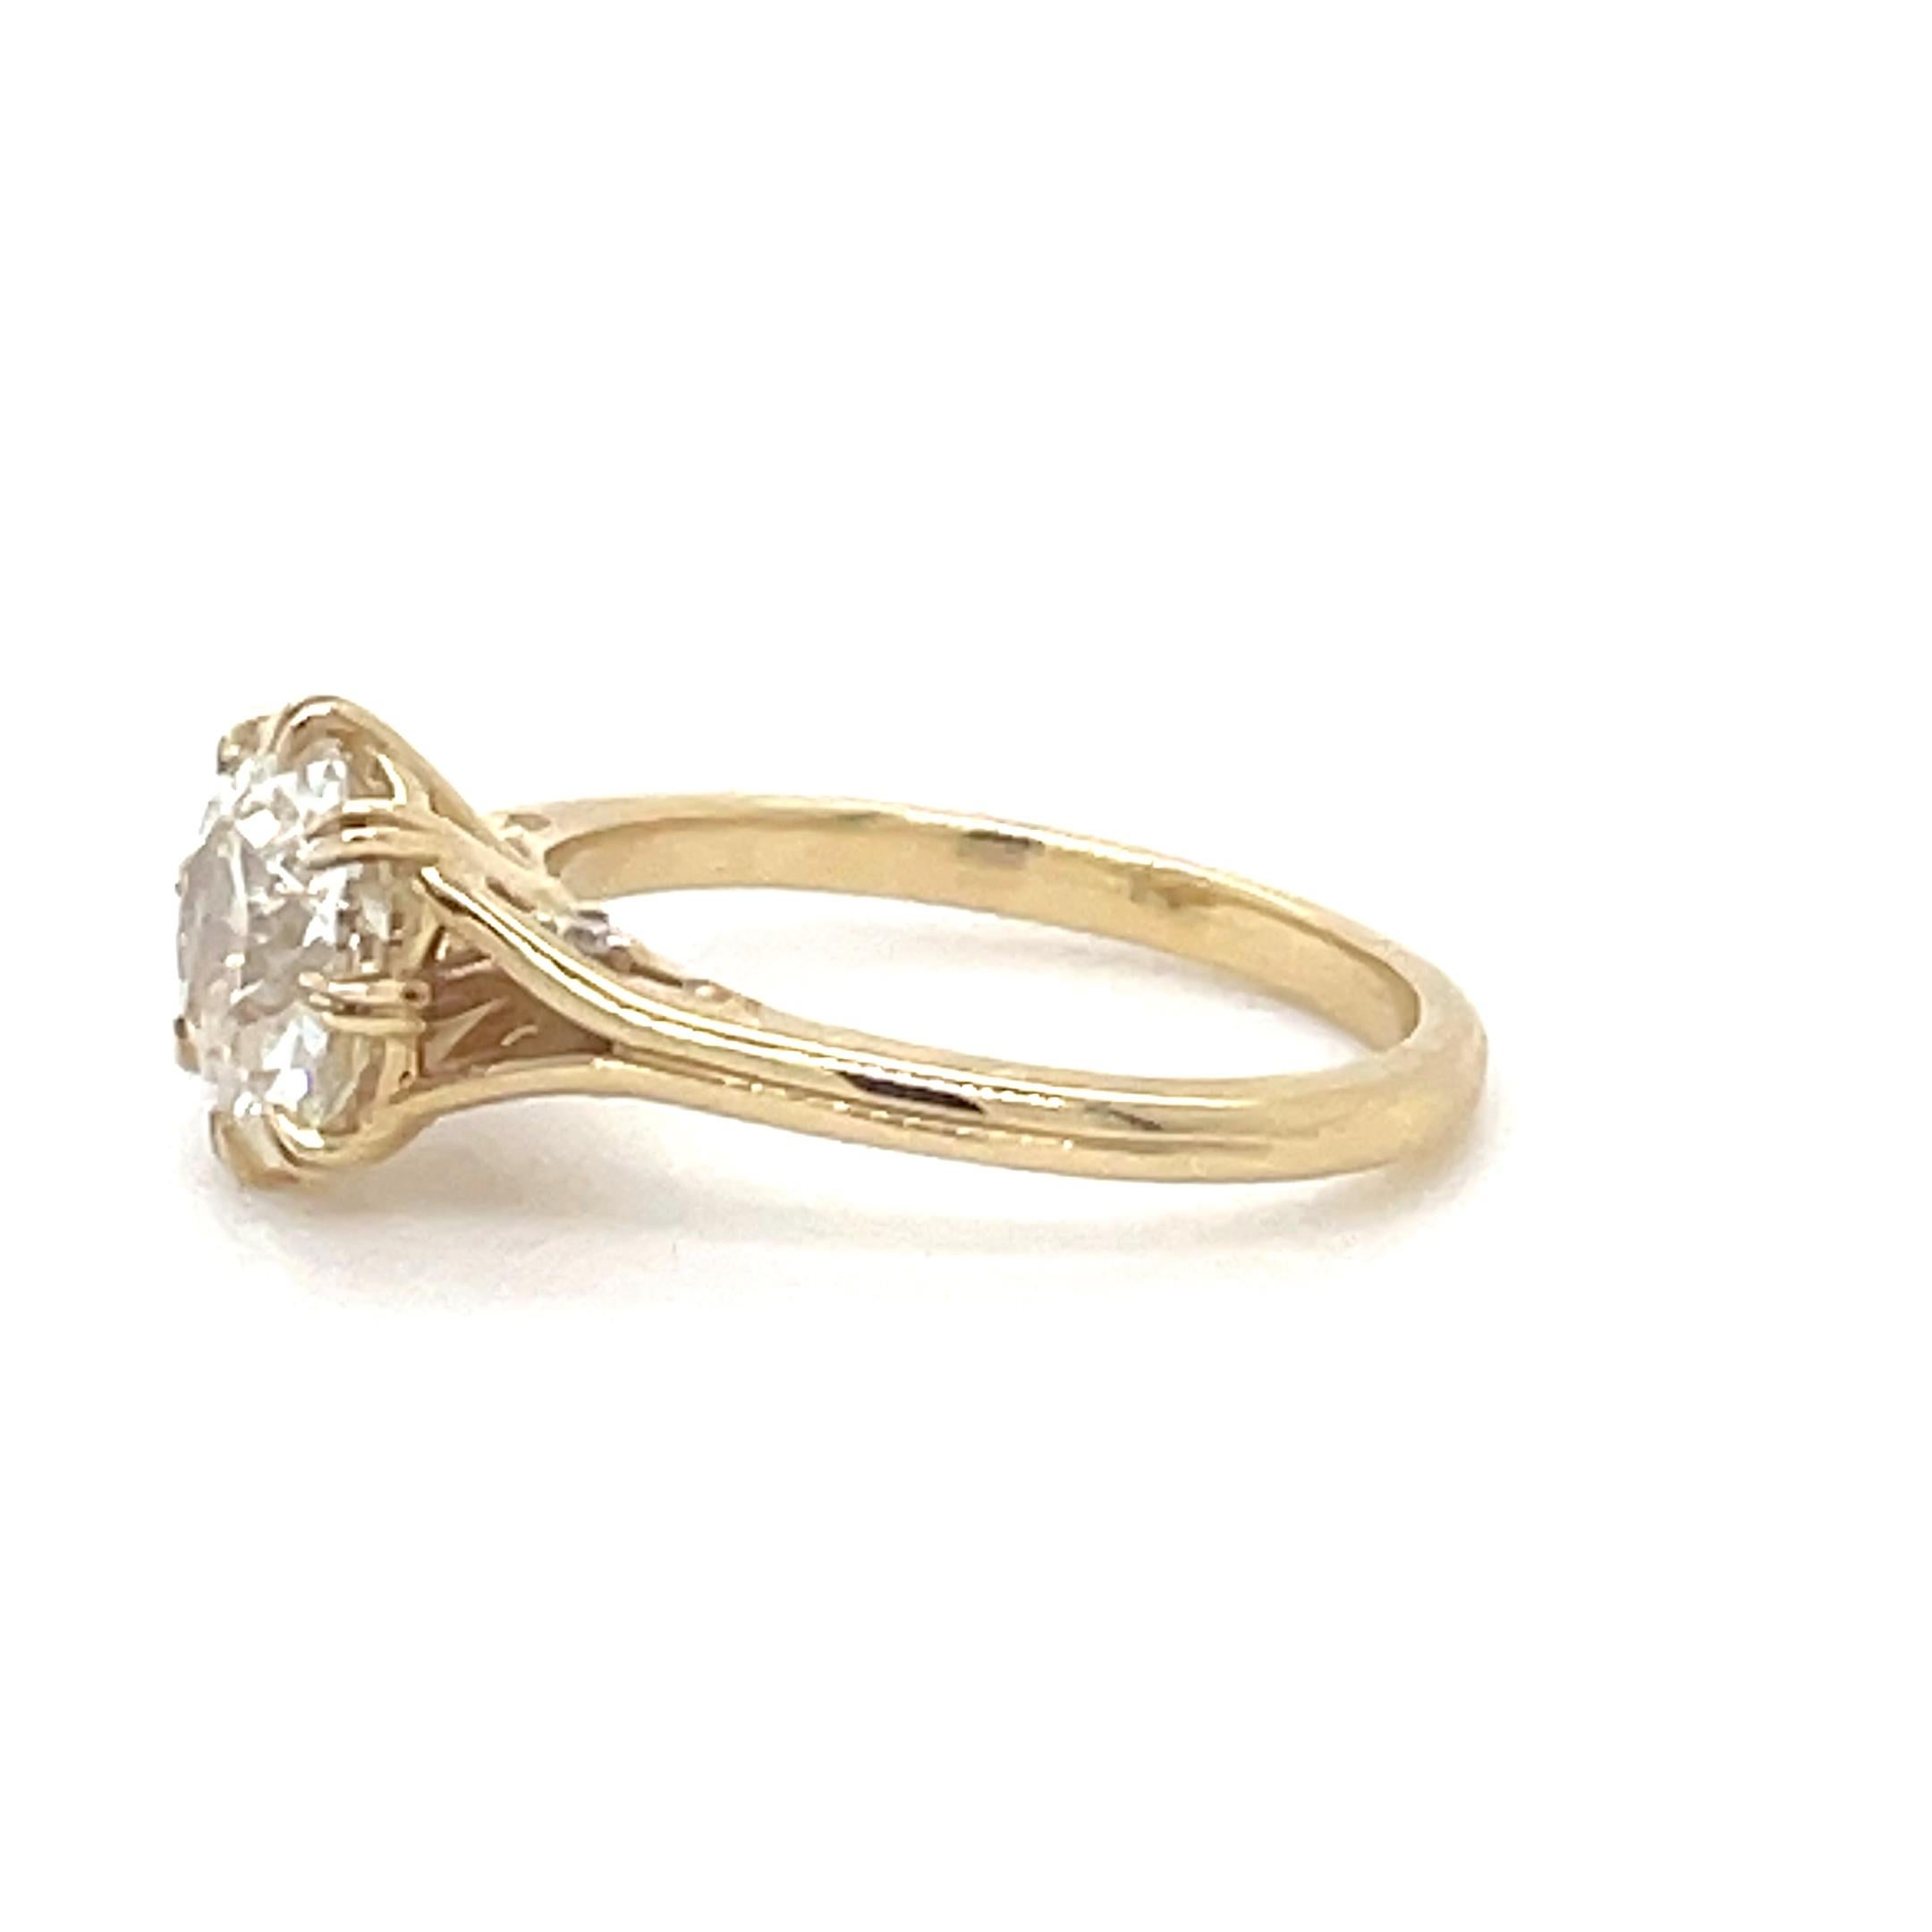 This beautifully classic ring, boasts a 1.90 carat antique cushion cut diamond surrounded by elegant claw prongs, atop a gallery with four round brilliant cut diamonds and circular detailing. Perfect for the heirloom seeker! 

Metal: 18 Karat